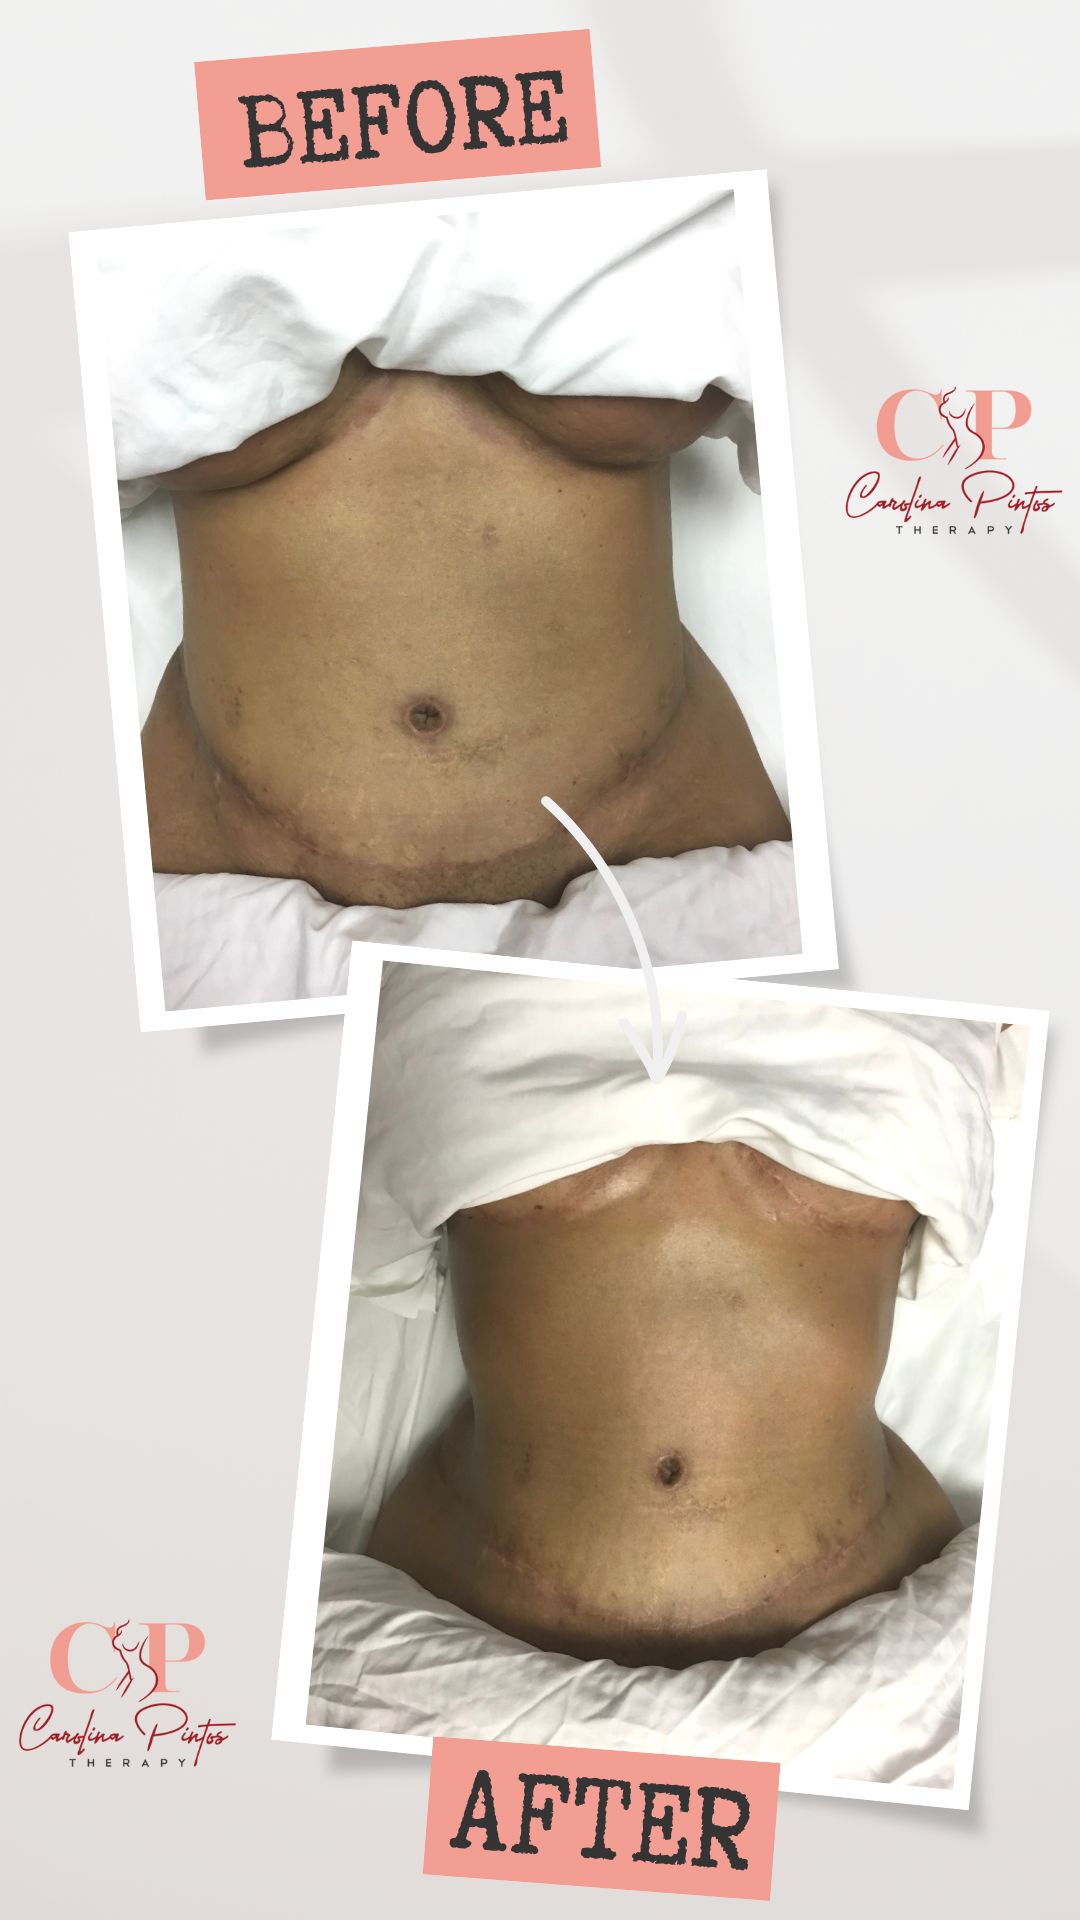 Post Op & Scar Tissue Treatment Before & After Photos